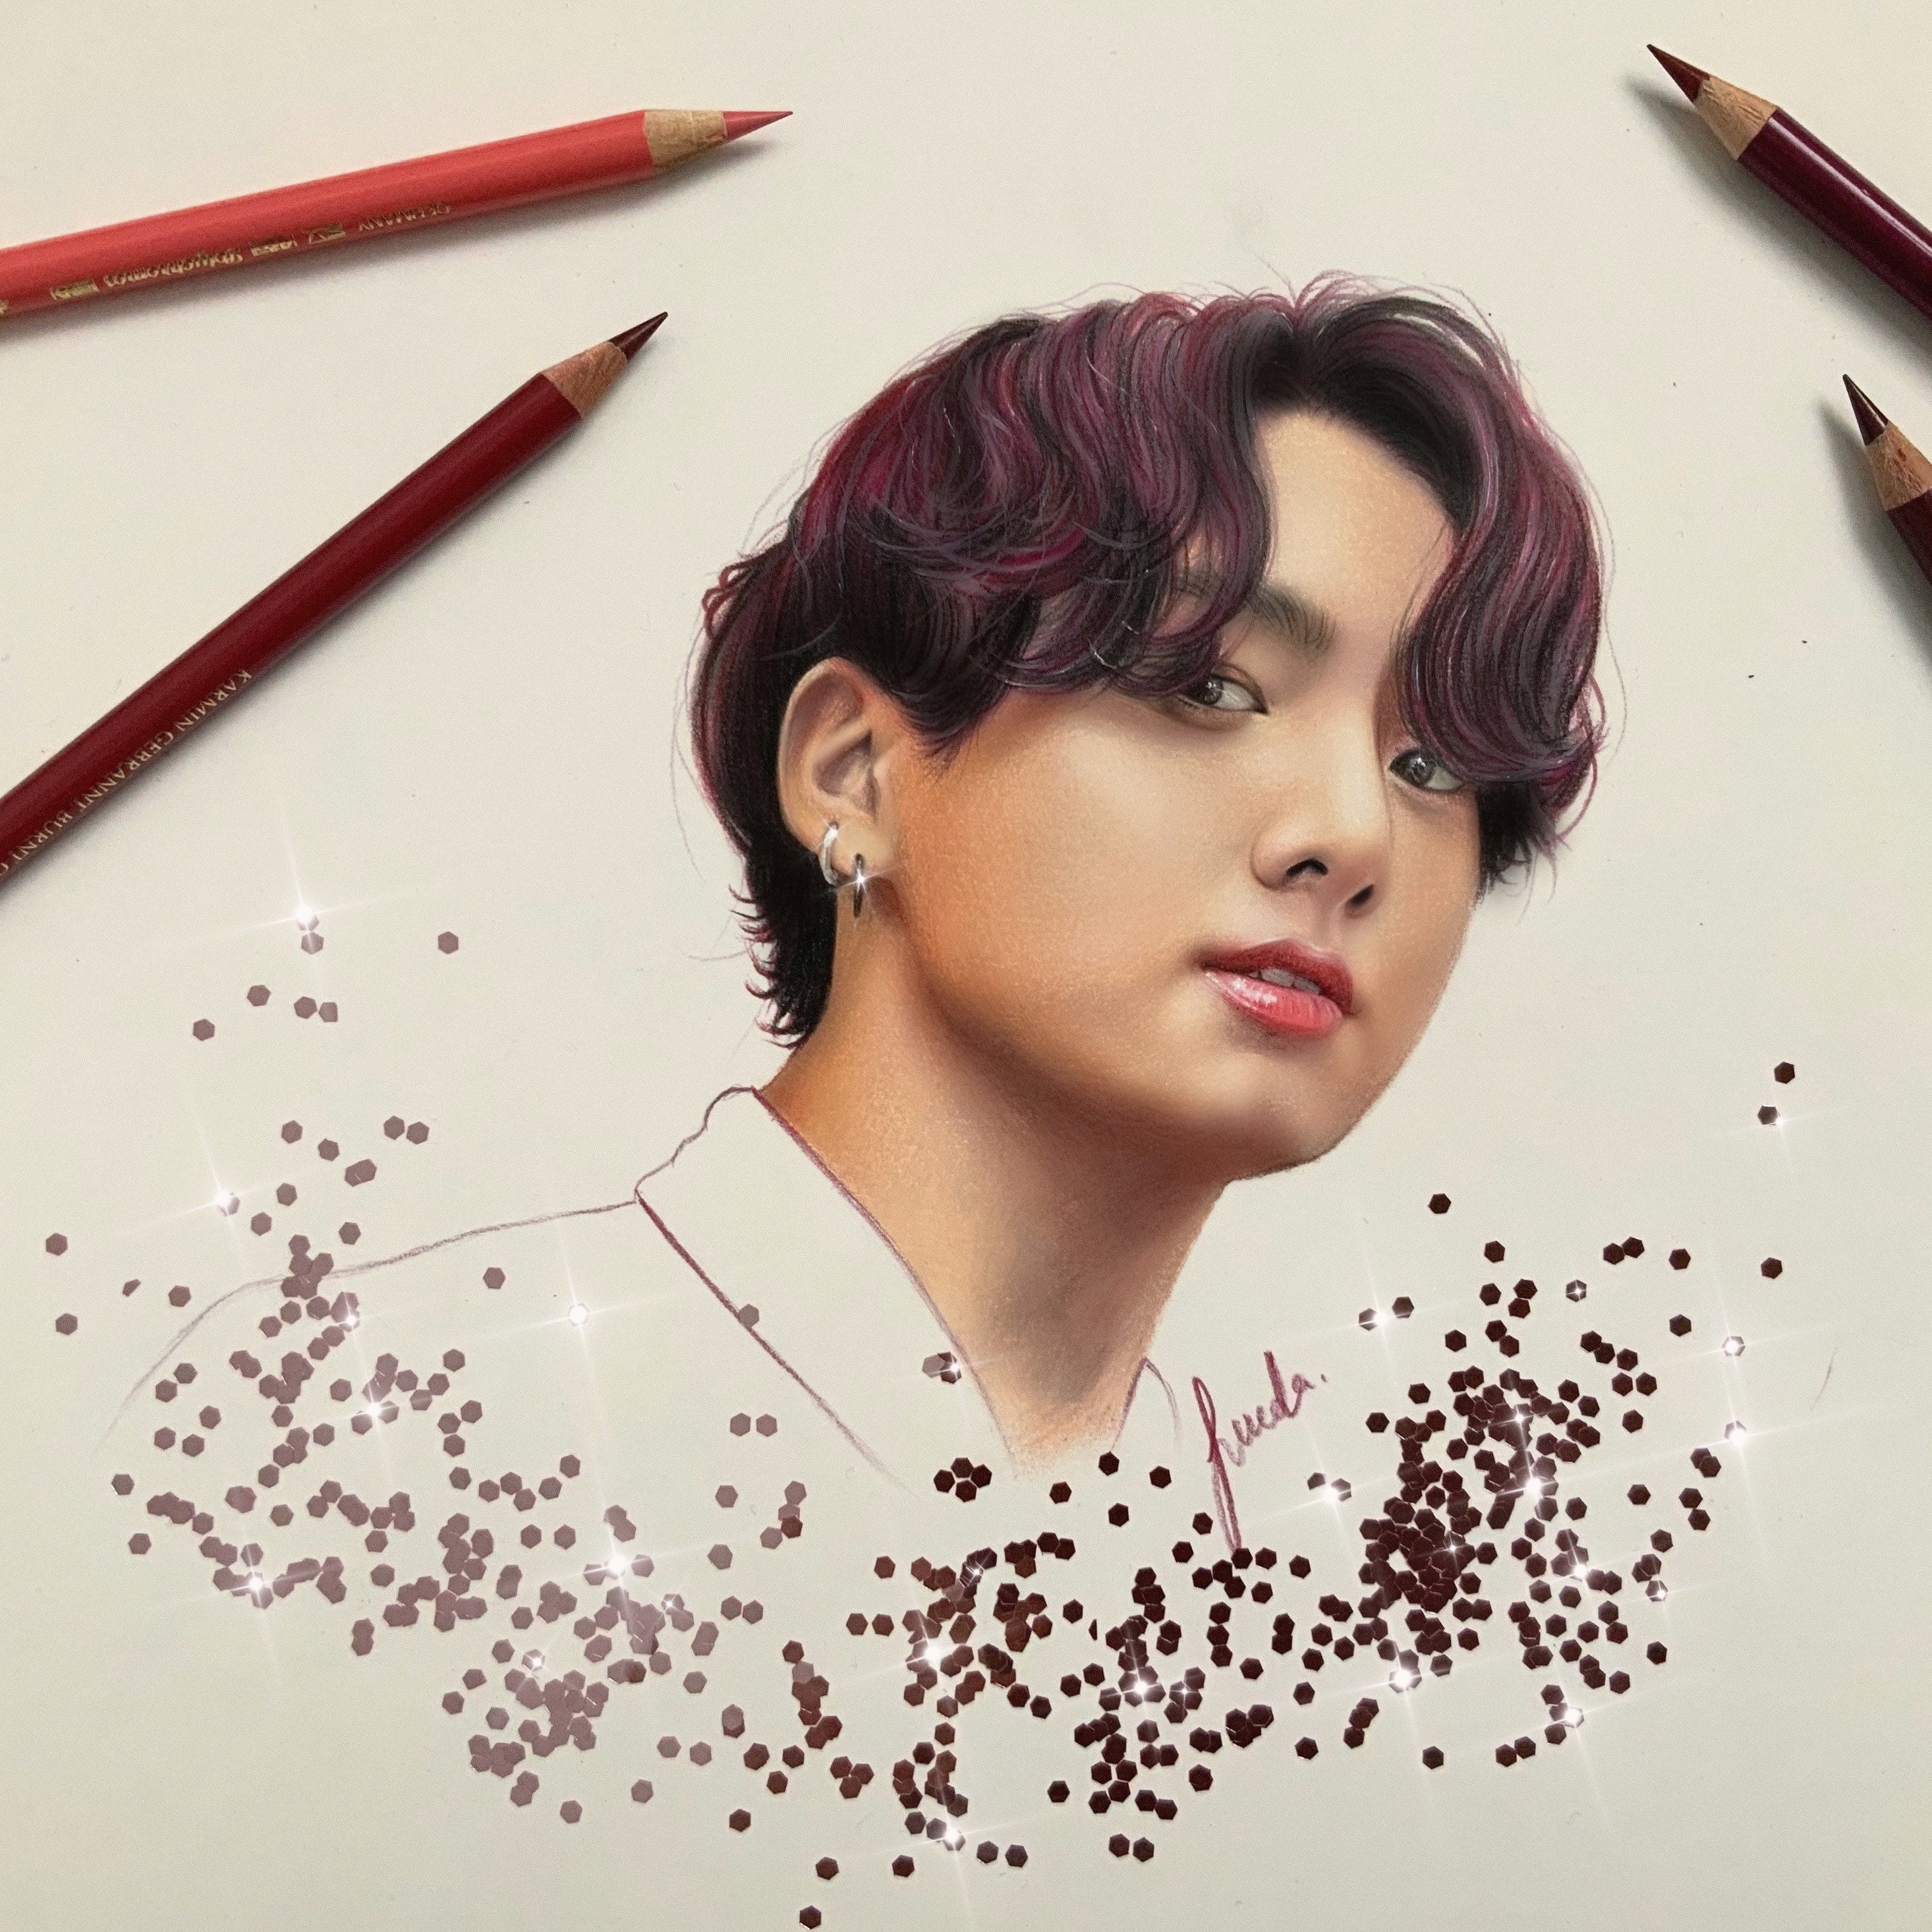 Buy BTS Jungkook Colored Pencil Drawing  PRINT From Original Online in  India  Etsy